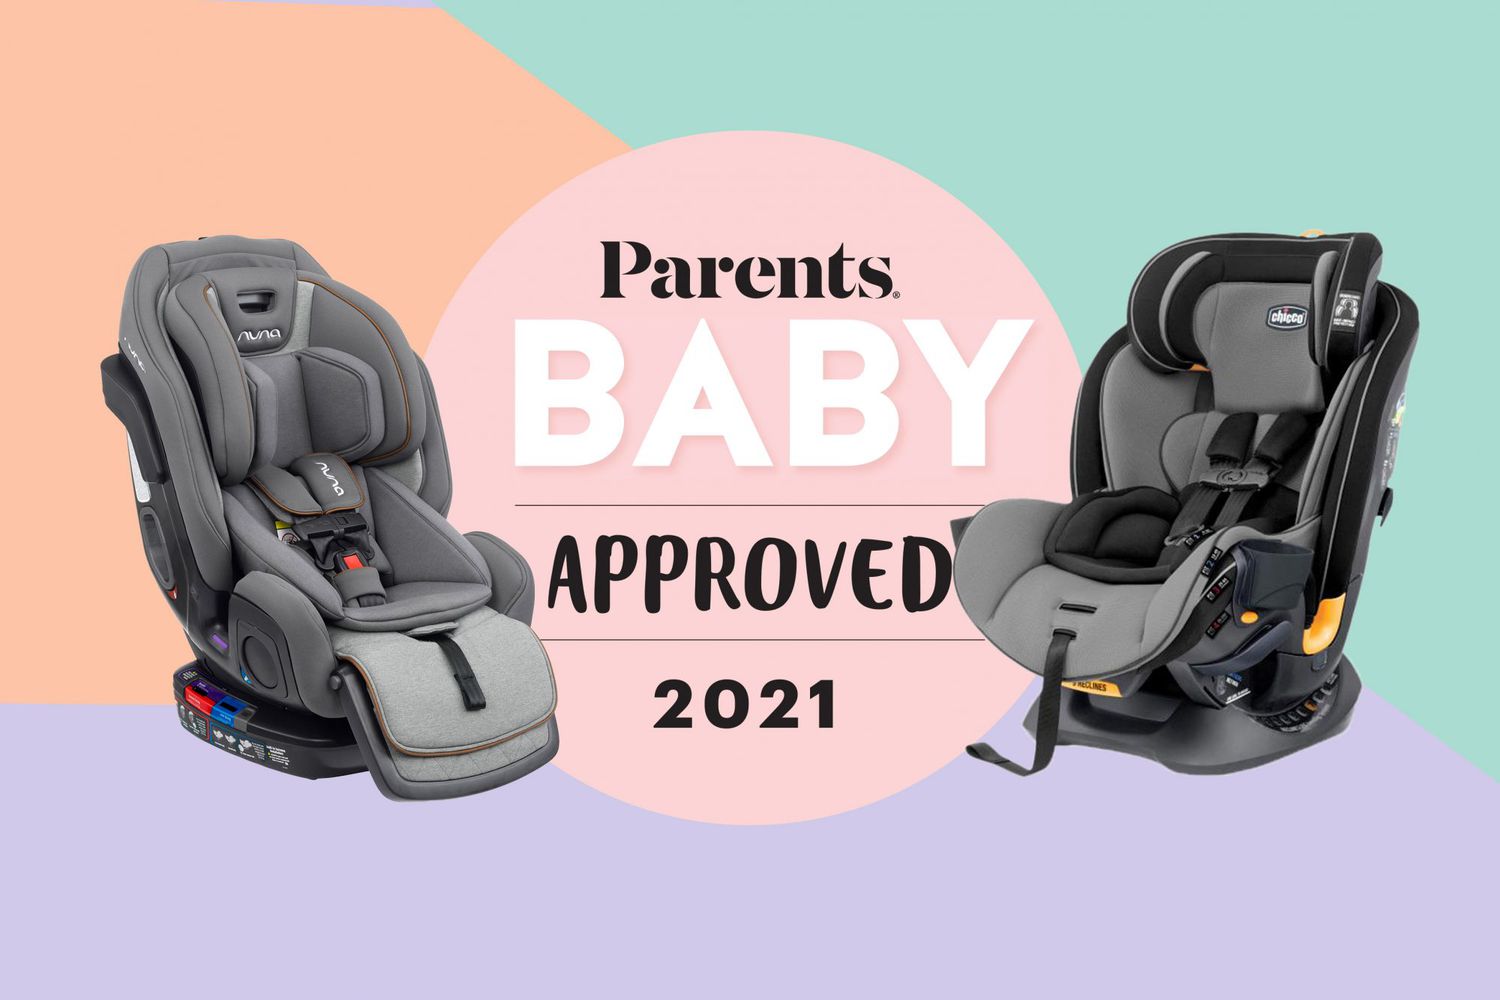 11 Best Convertible Car Seats 2021, What Is The Best Car Seat For 1 Year Old